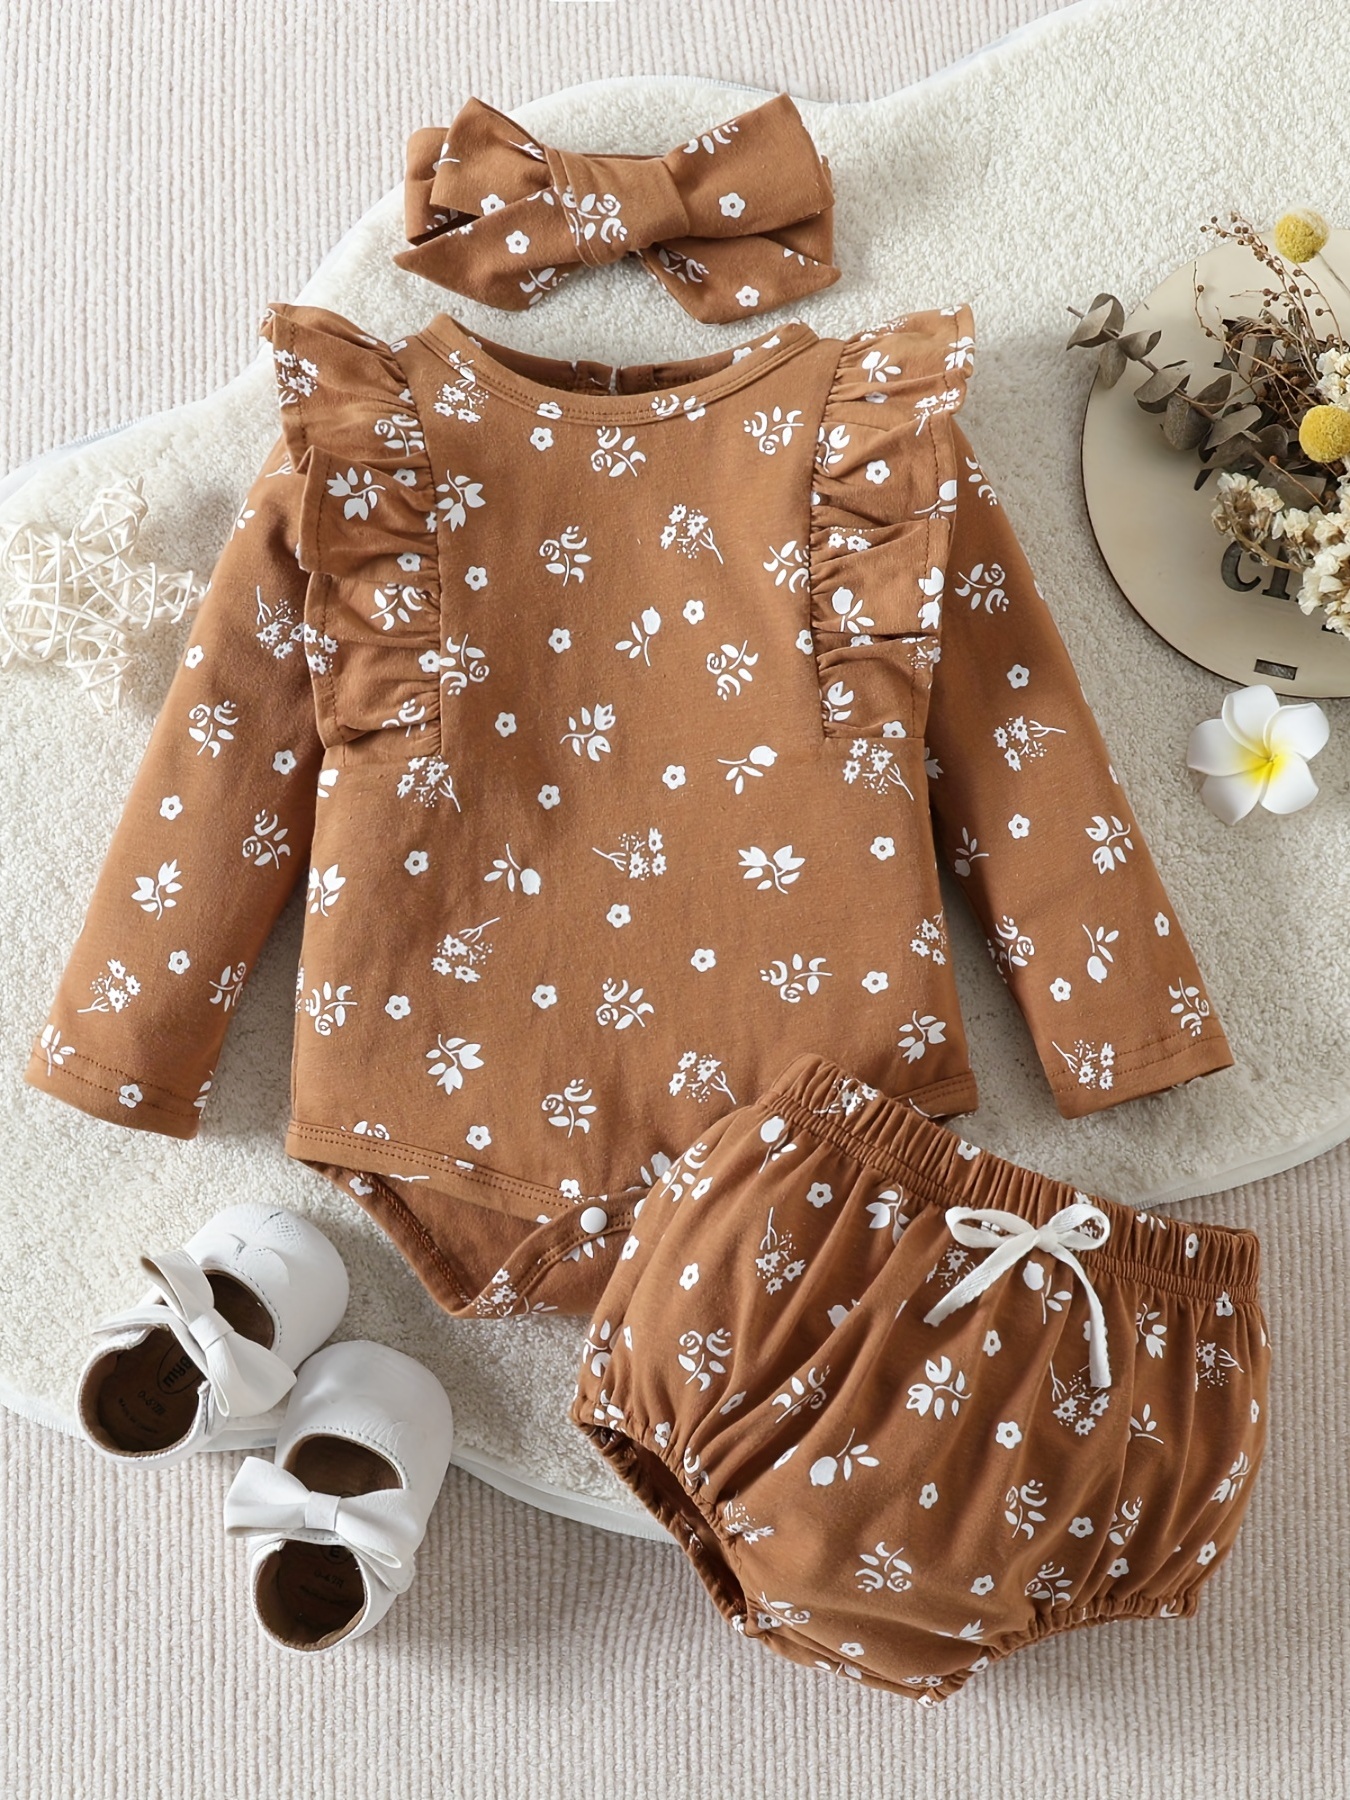 Newborn Baby Girl Clothes Romper Shorts Set Floral Summer Outfits